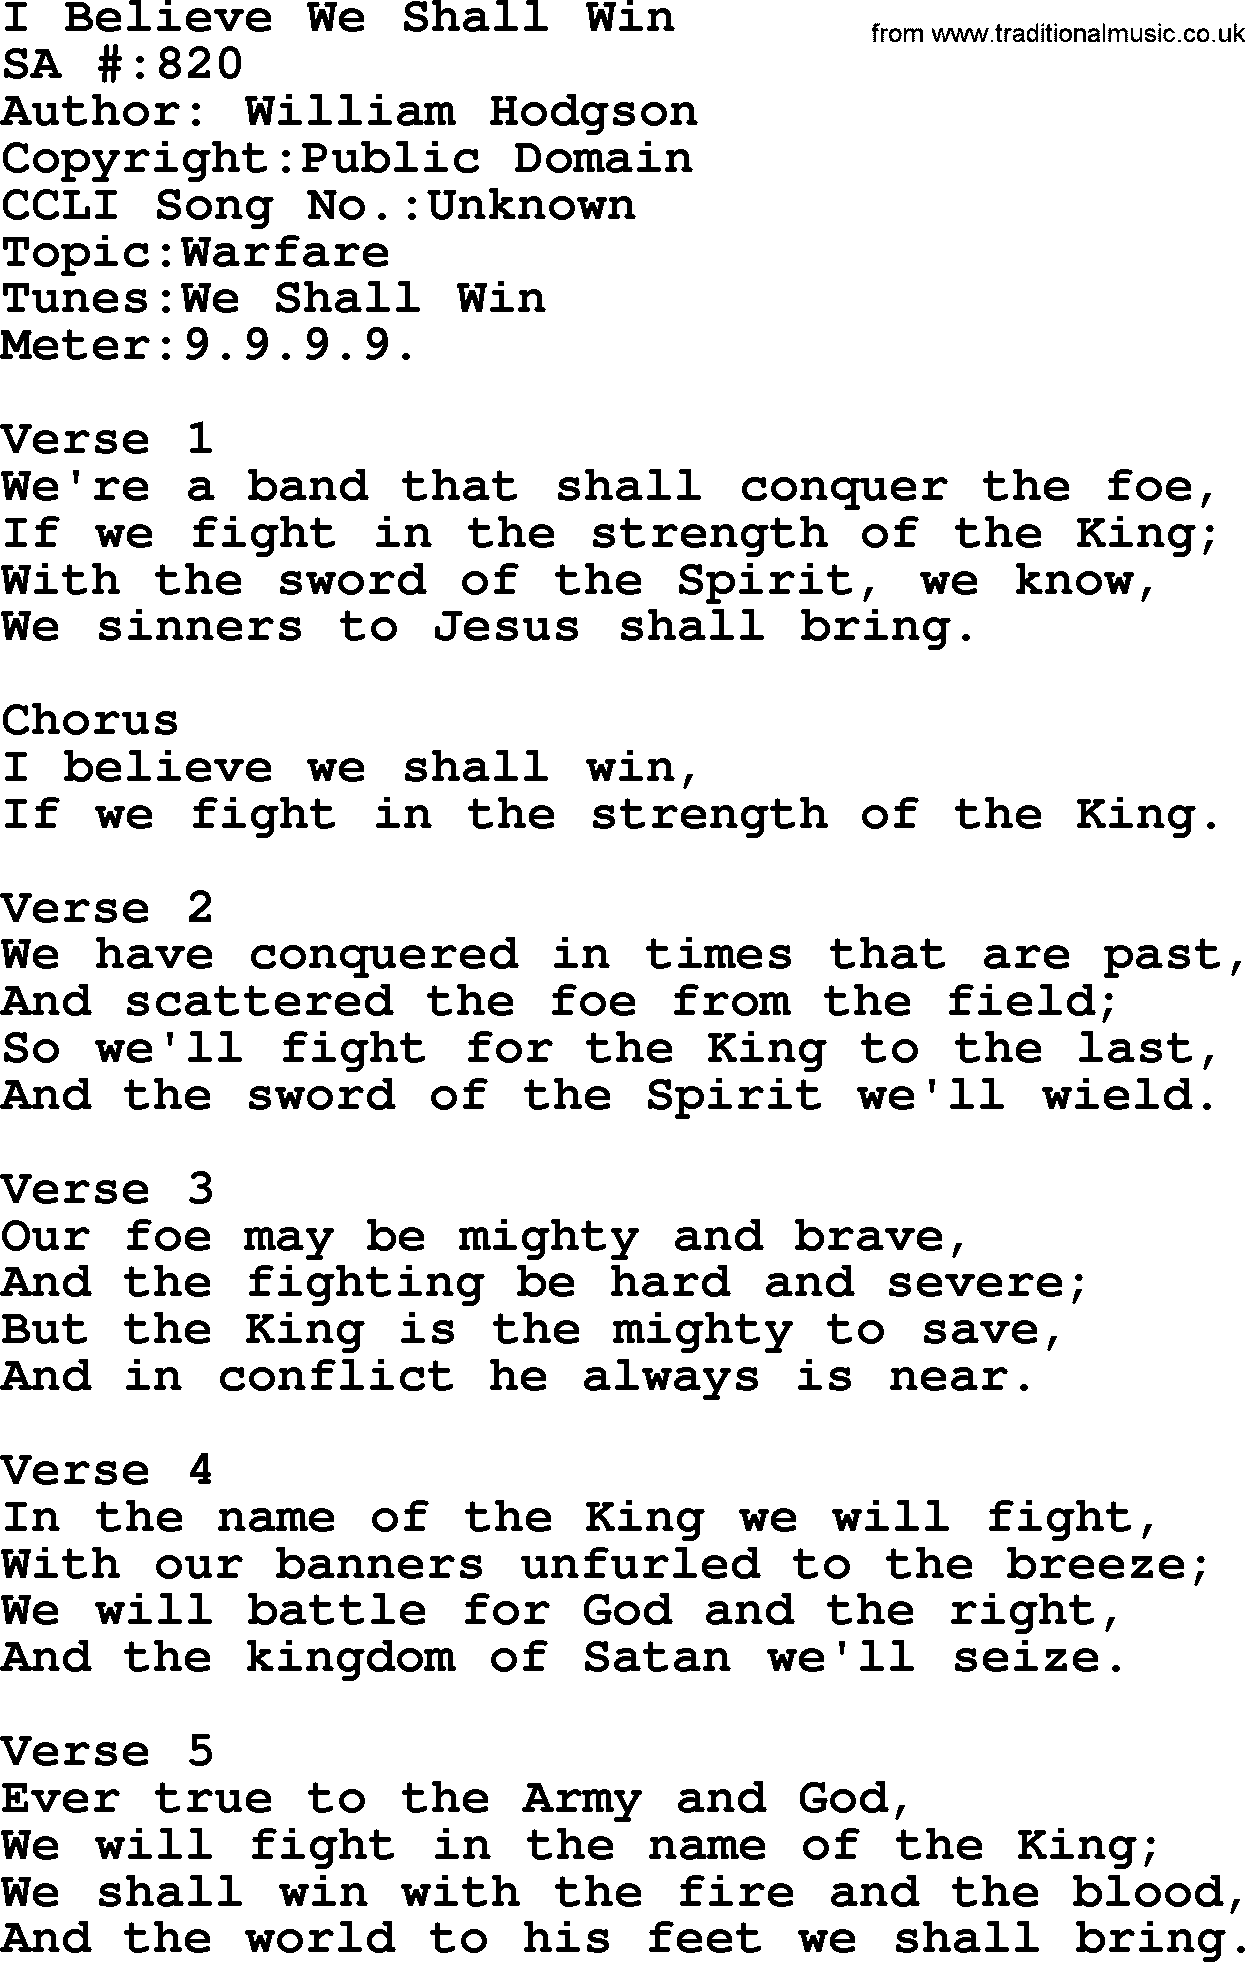 Salvation Army Hymnal, title: I Believe We Shall Win, with lyrics and PDF,